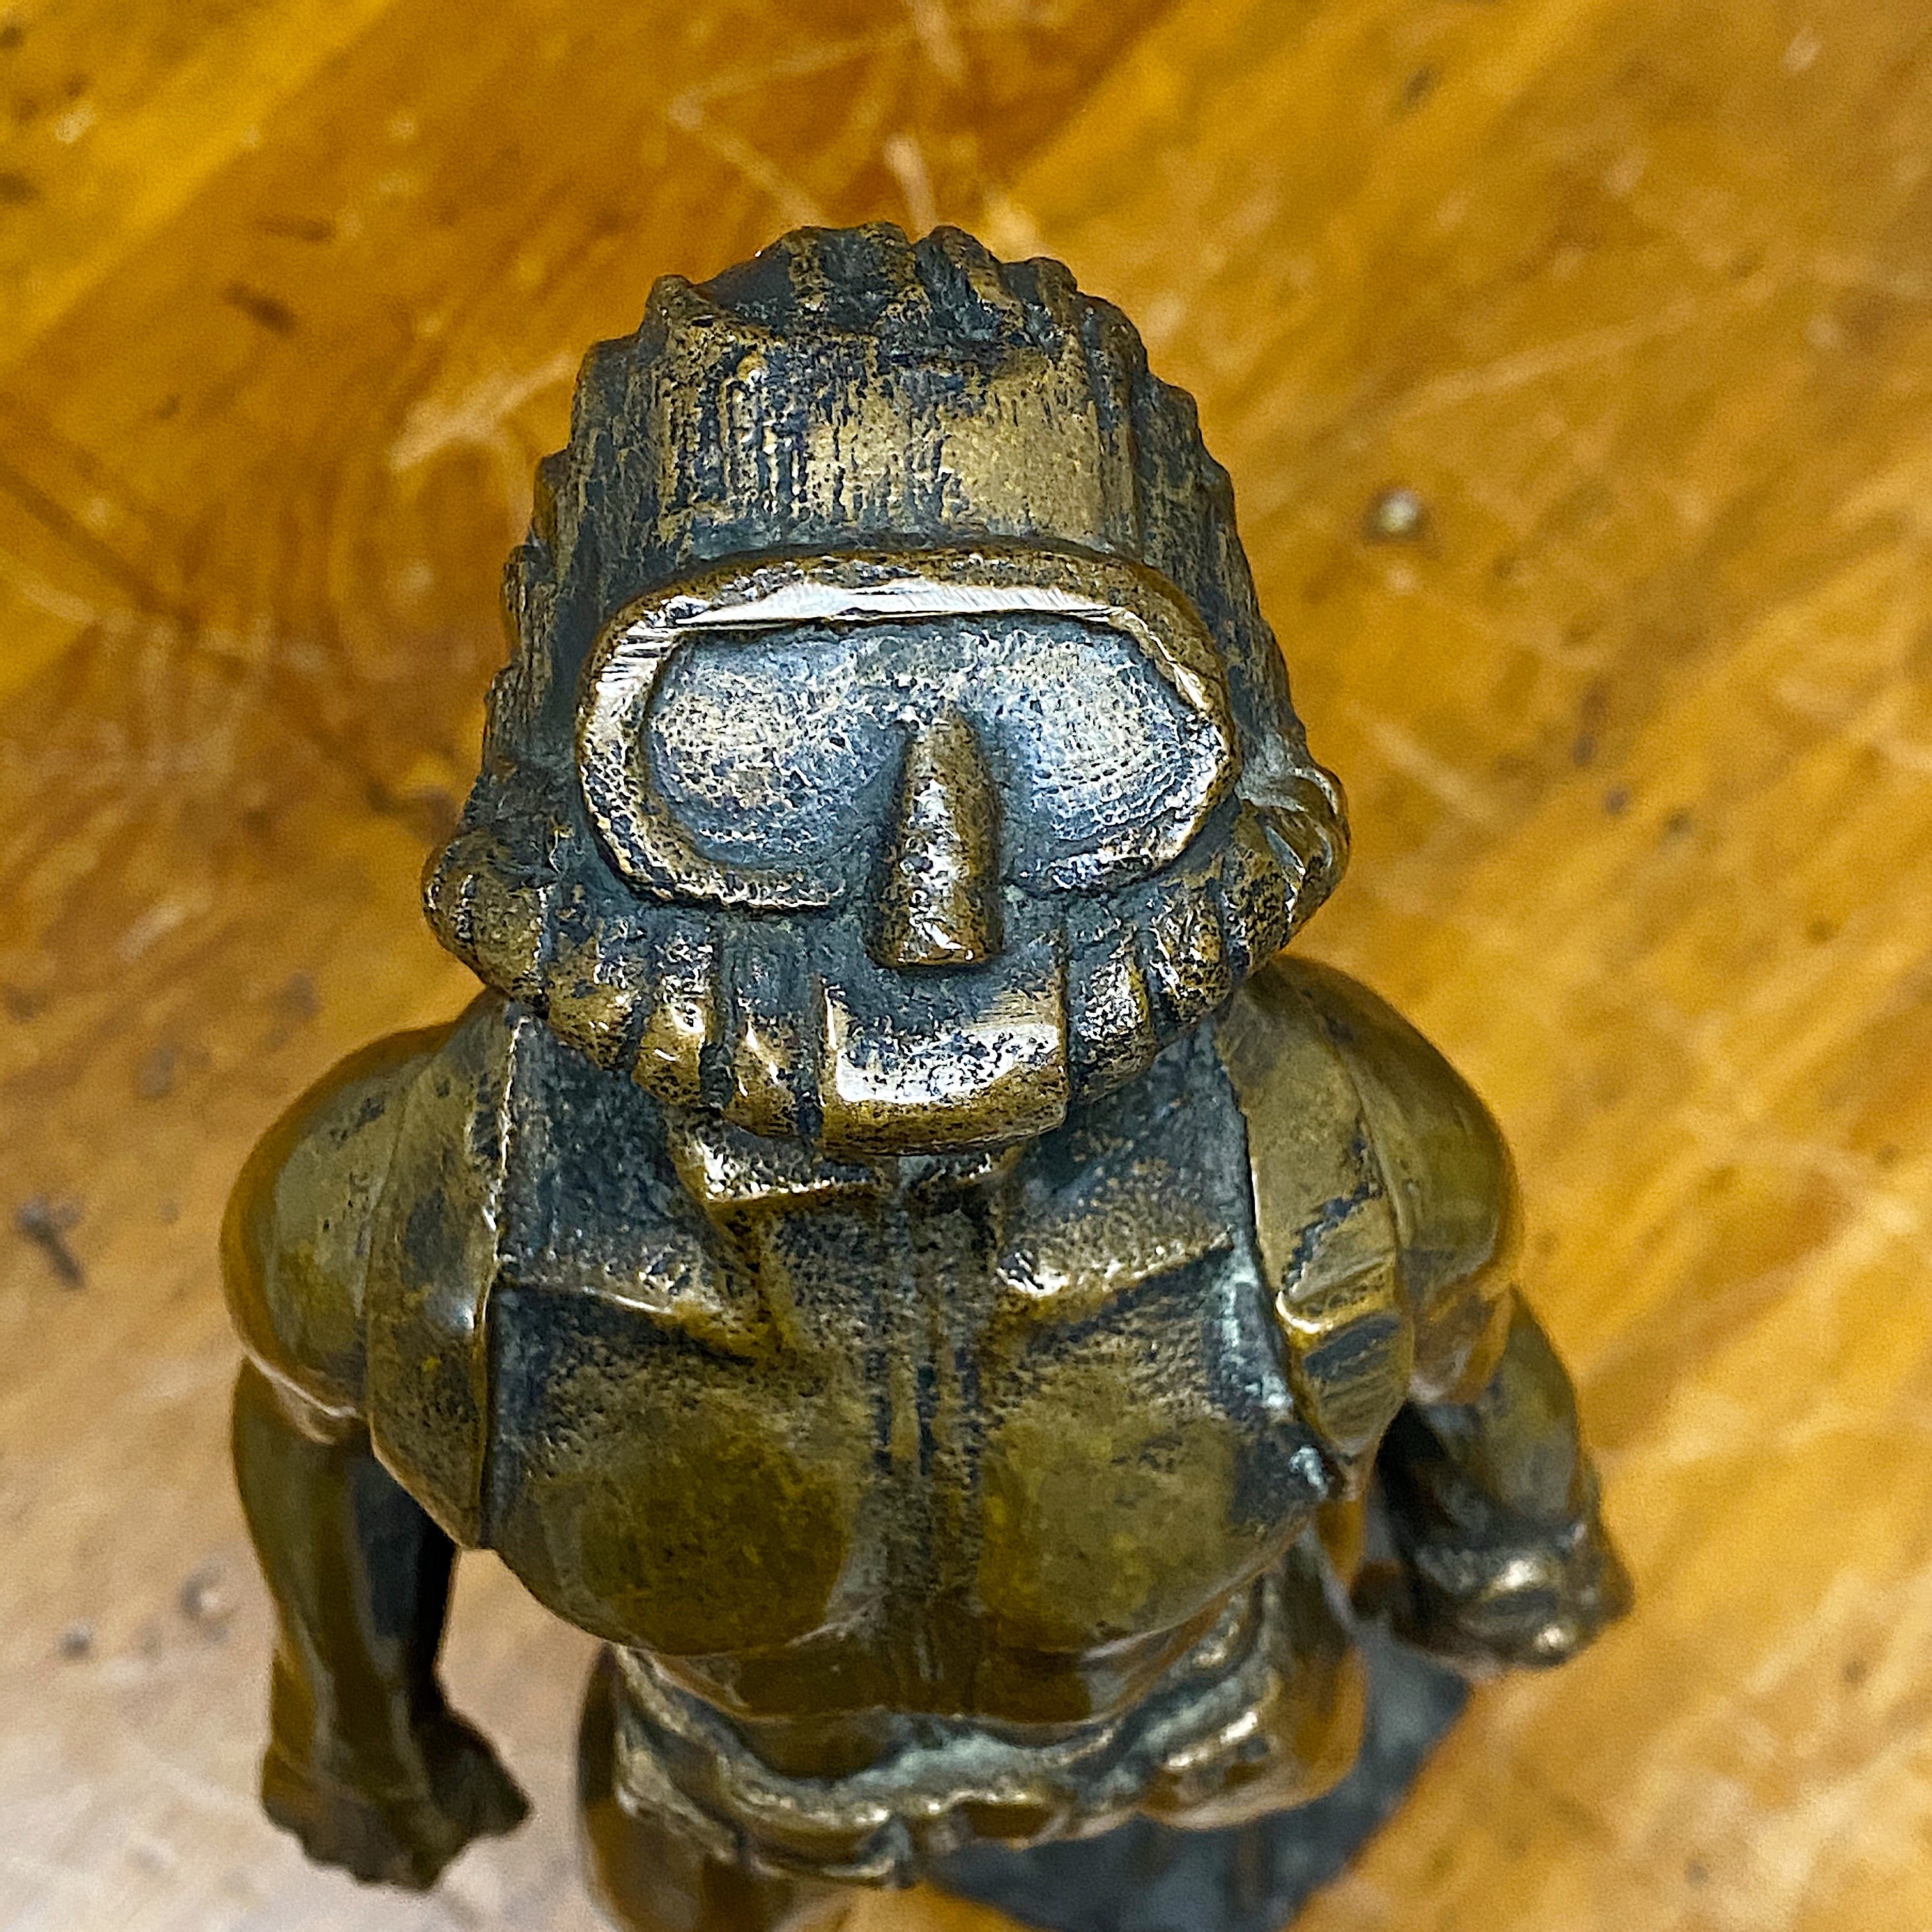 Face of Scuba Diver Bronze Sculpture from 1973 - Signed by Mystery Artist - 14" tall - Rare Nautical Sculptures - Vintage Deep Sea Collectible